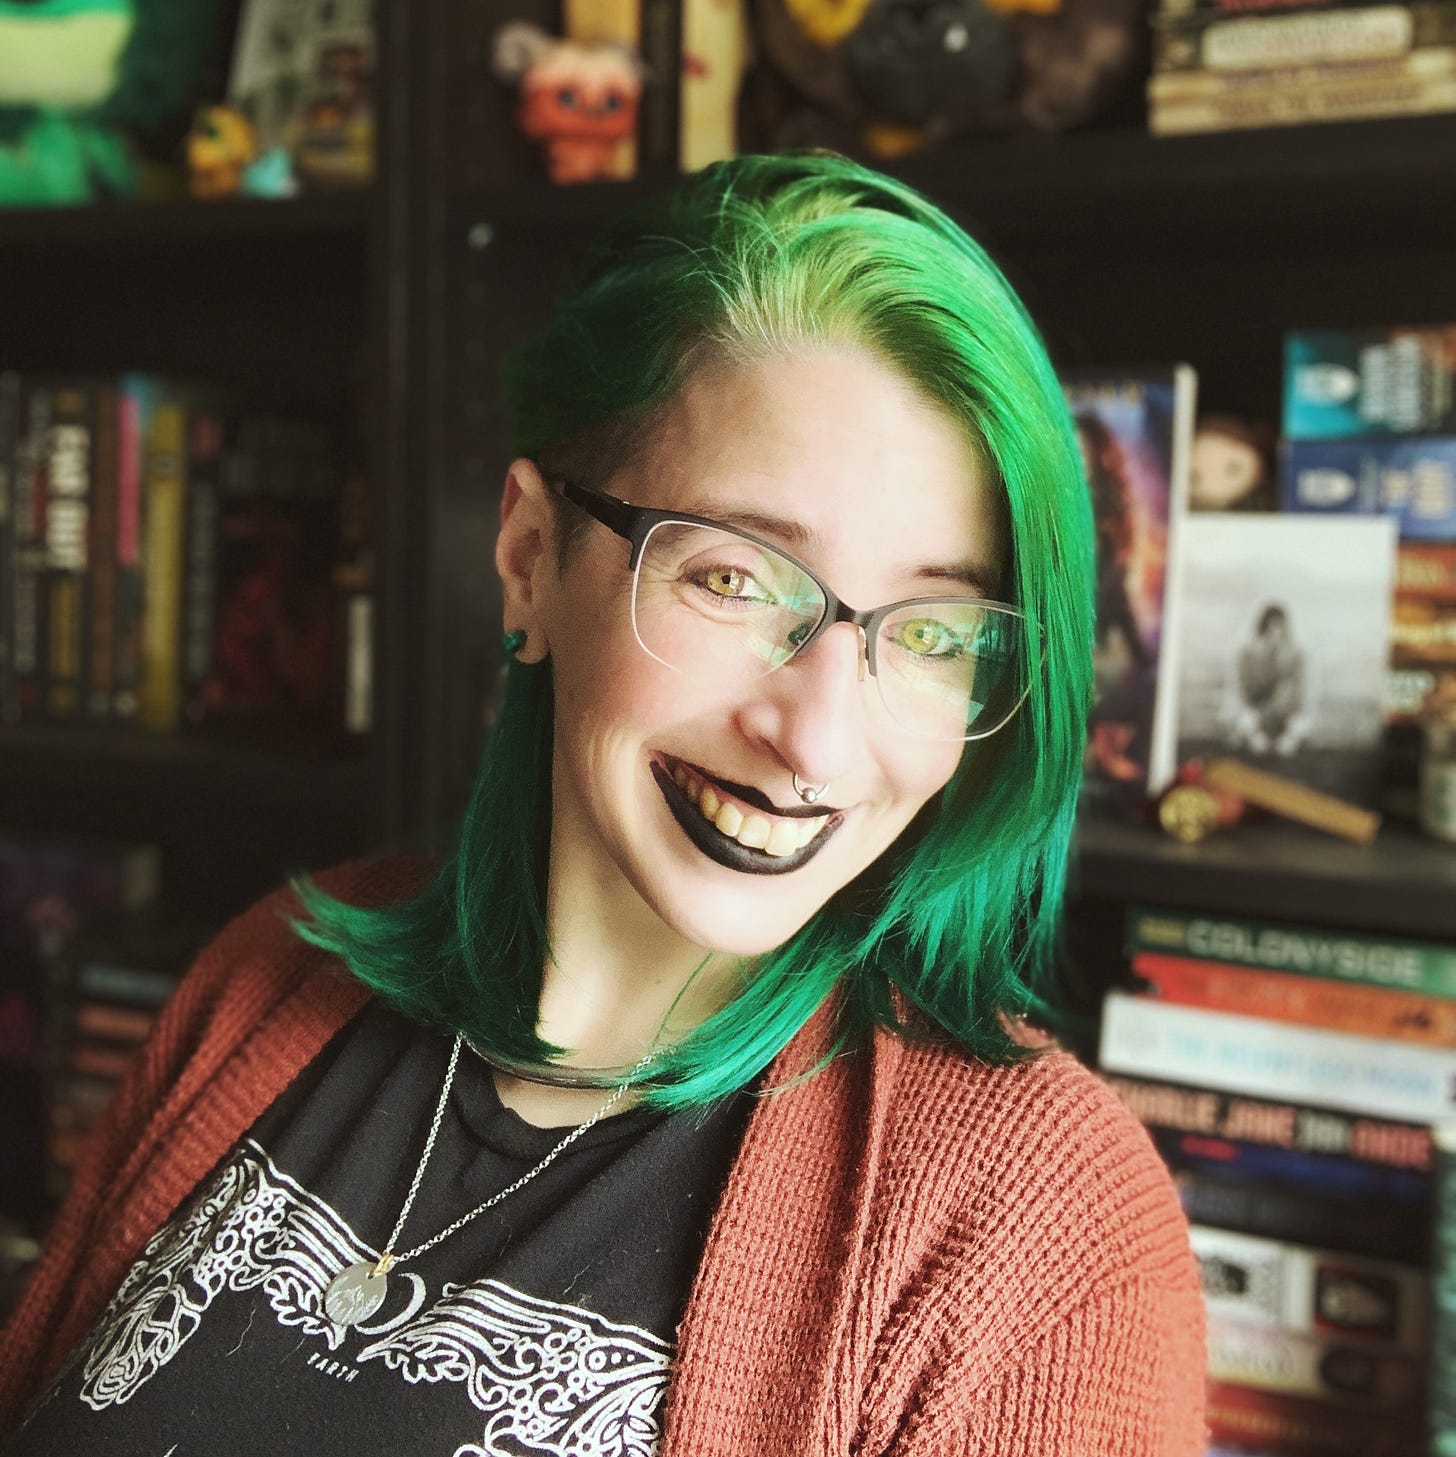 Jen stands in front of her bookshelves smiling. She is wearing black lipstick, her green hair is swepts over, and she's wearing an orange cardigan. 